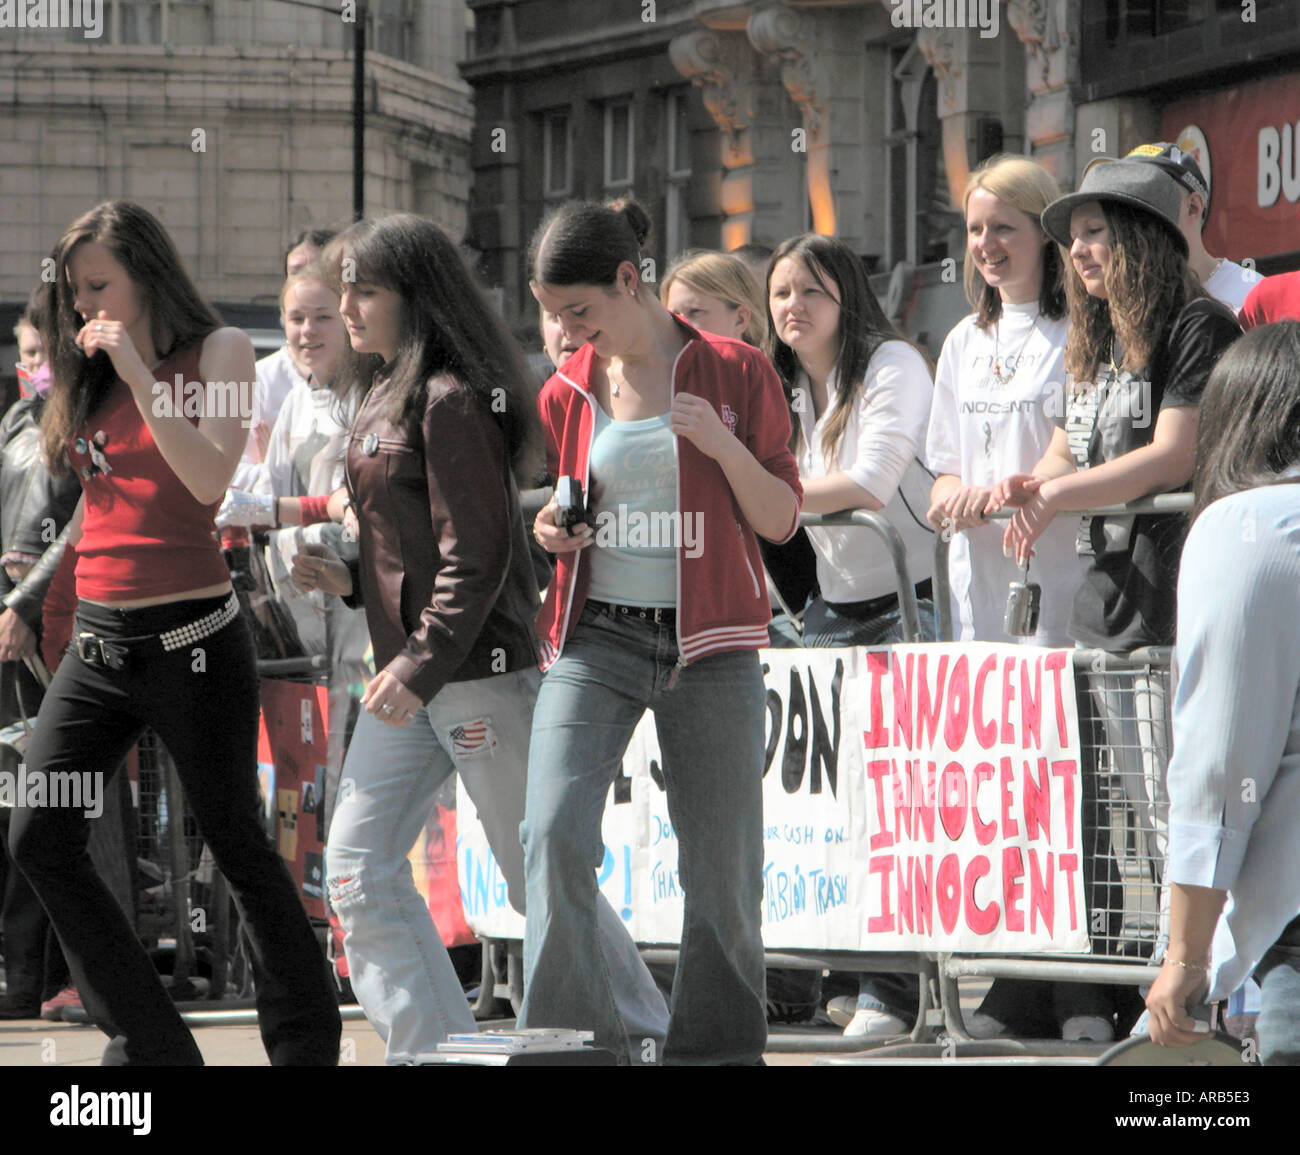 An organised protest in support of Michael Jackson at Piccadilly Circus London Stock Photo